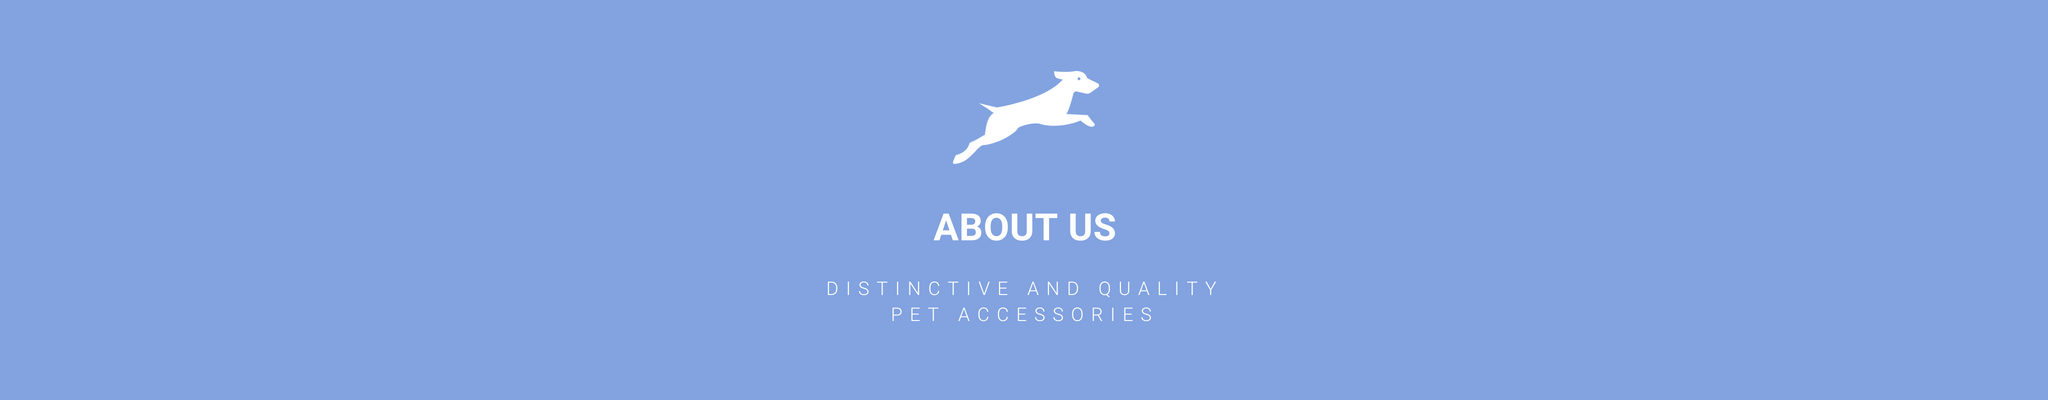 New pets on the block luxury modern design dog and cat accessories about us